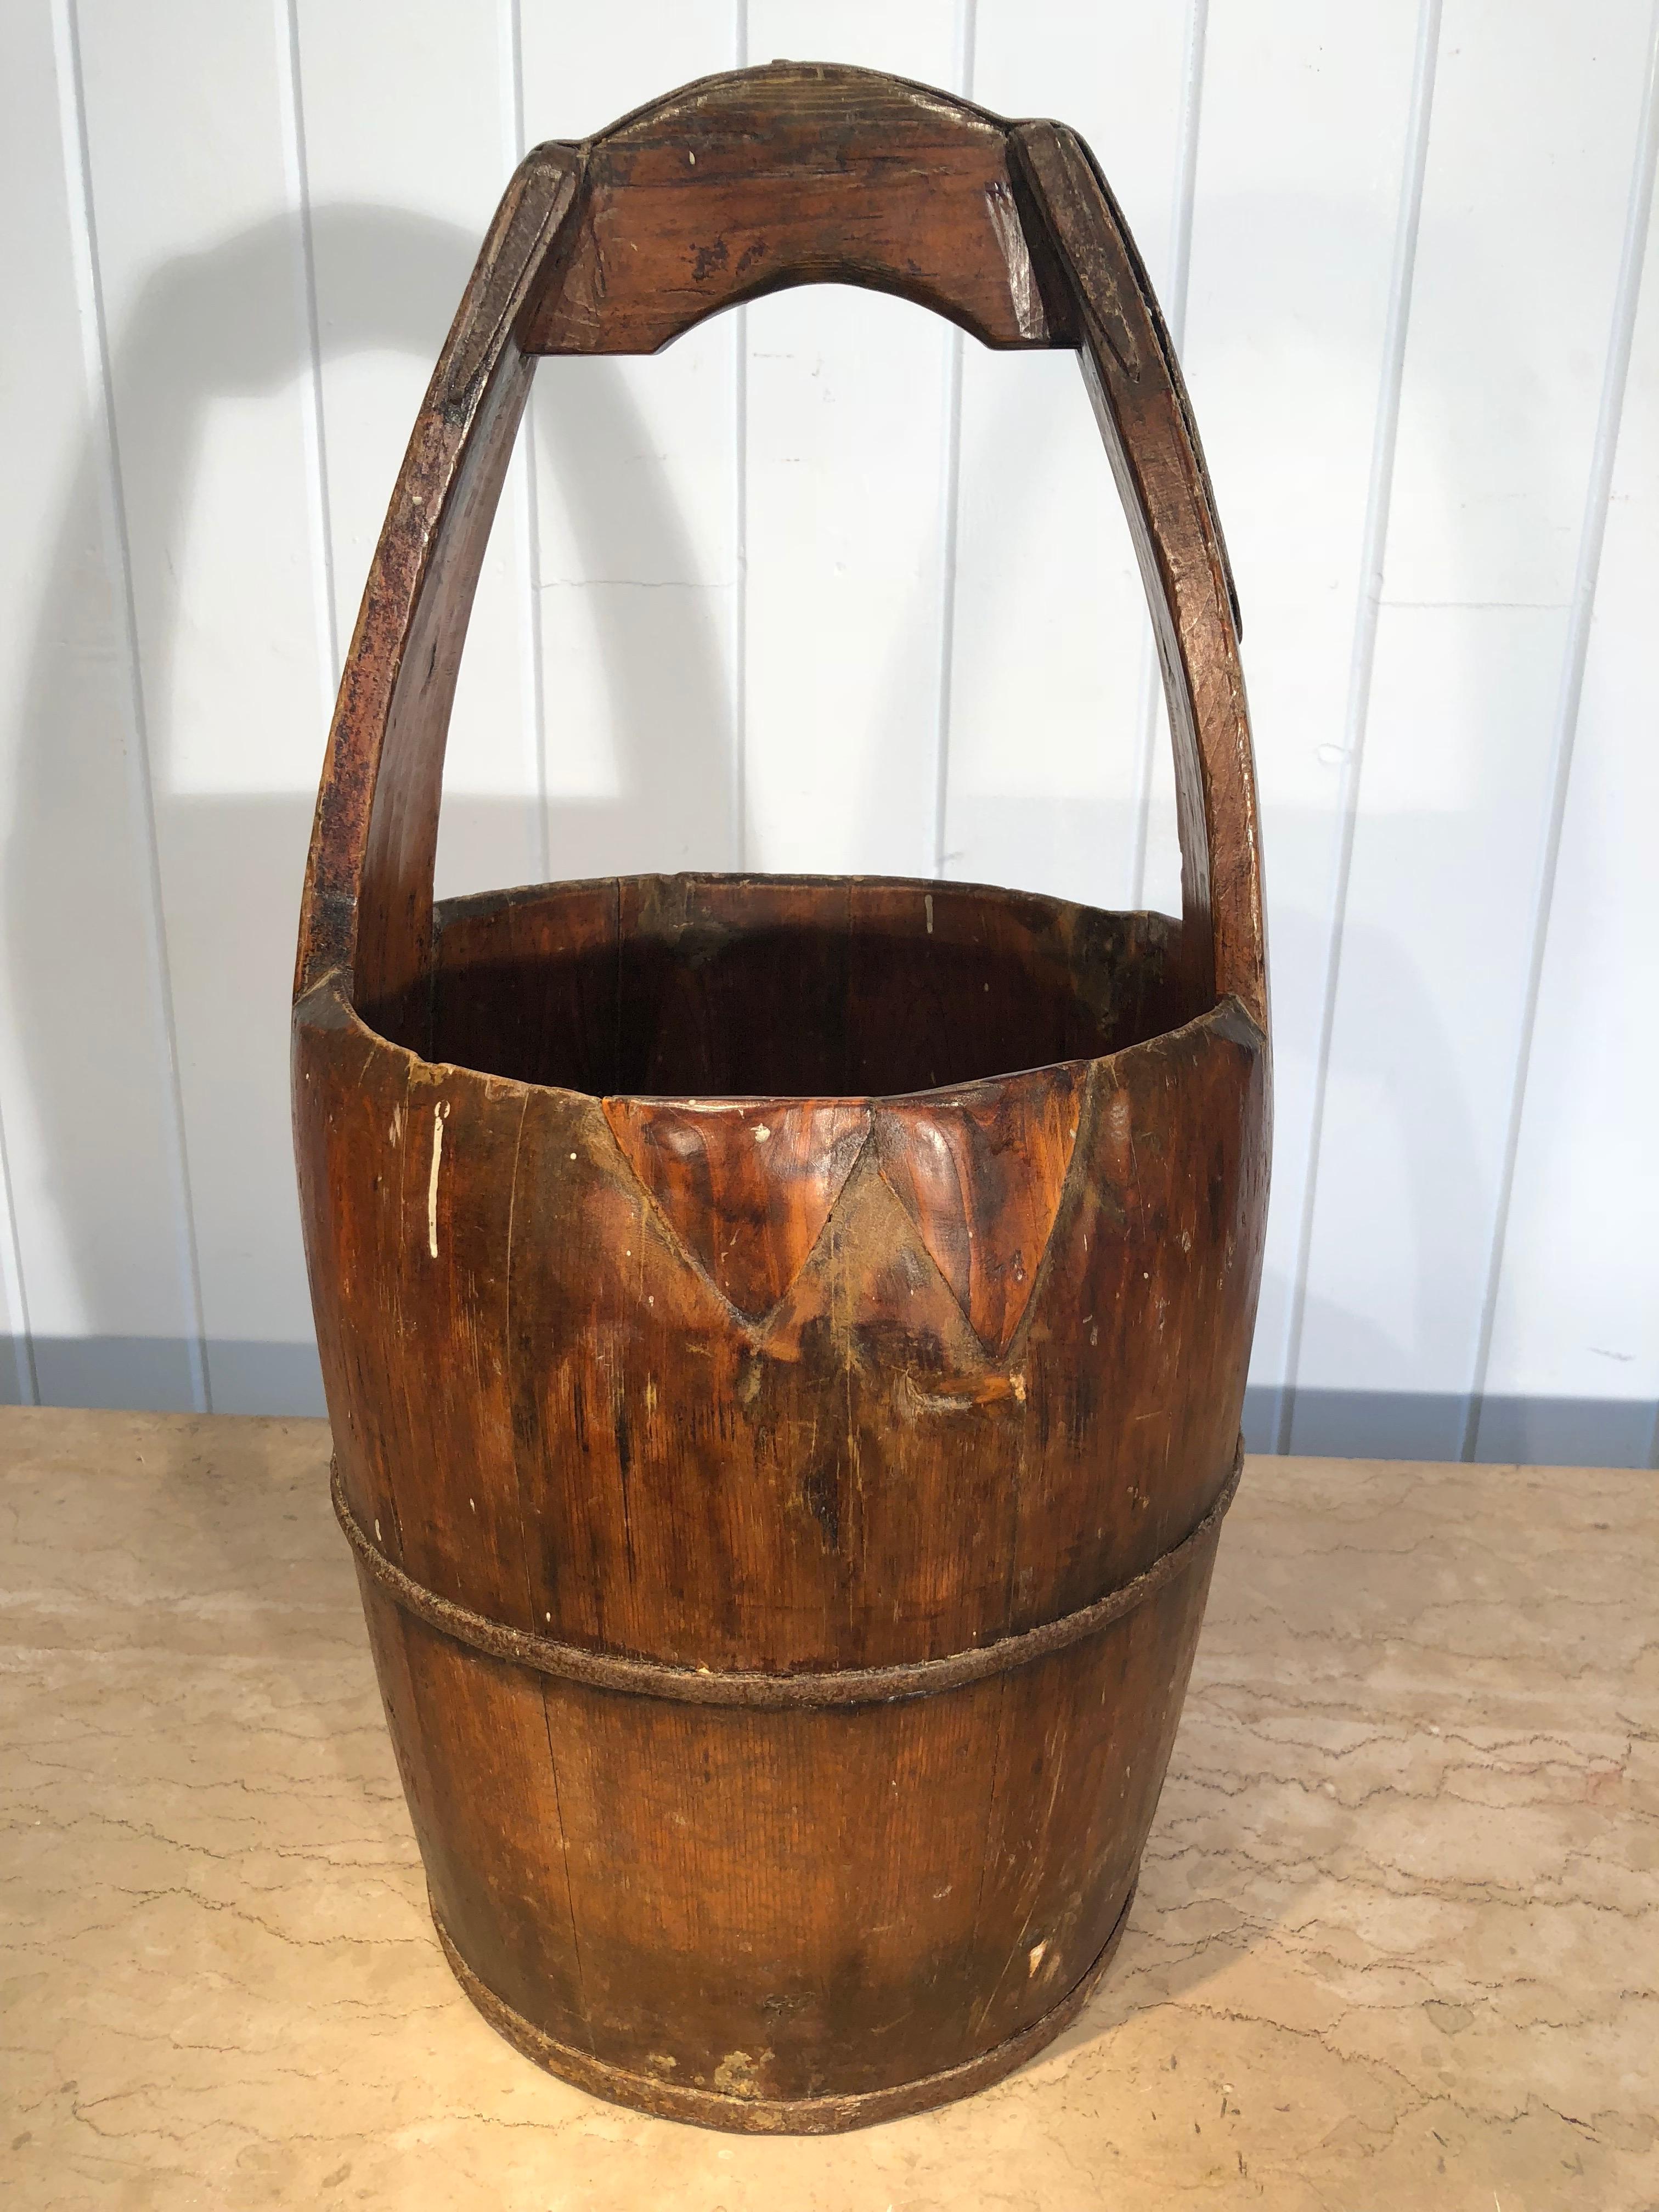 We found two of these lovely handmade oak milk buckets at our local brocante in Tournon d'Agenais, and they are beauties. We have cleaned and polished them so their deep lustrous patina shows to their best effect. They would make great decorative